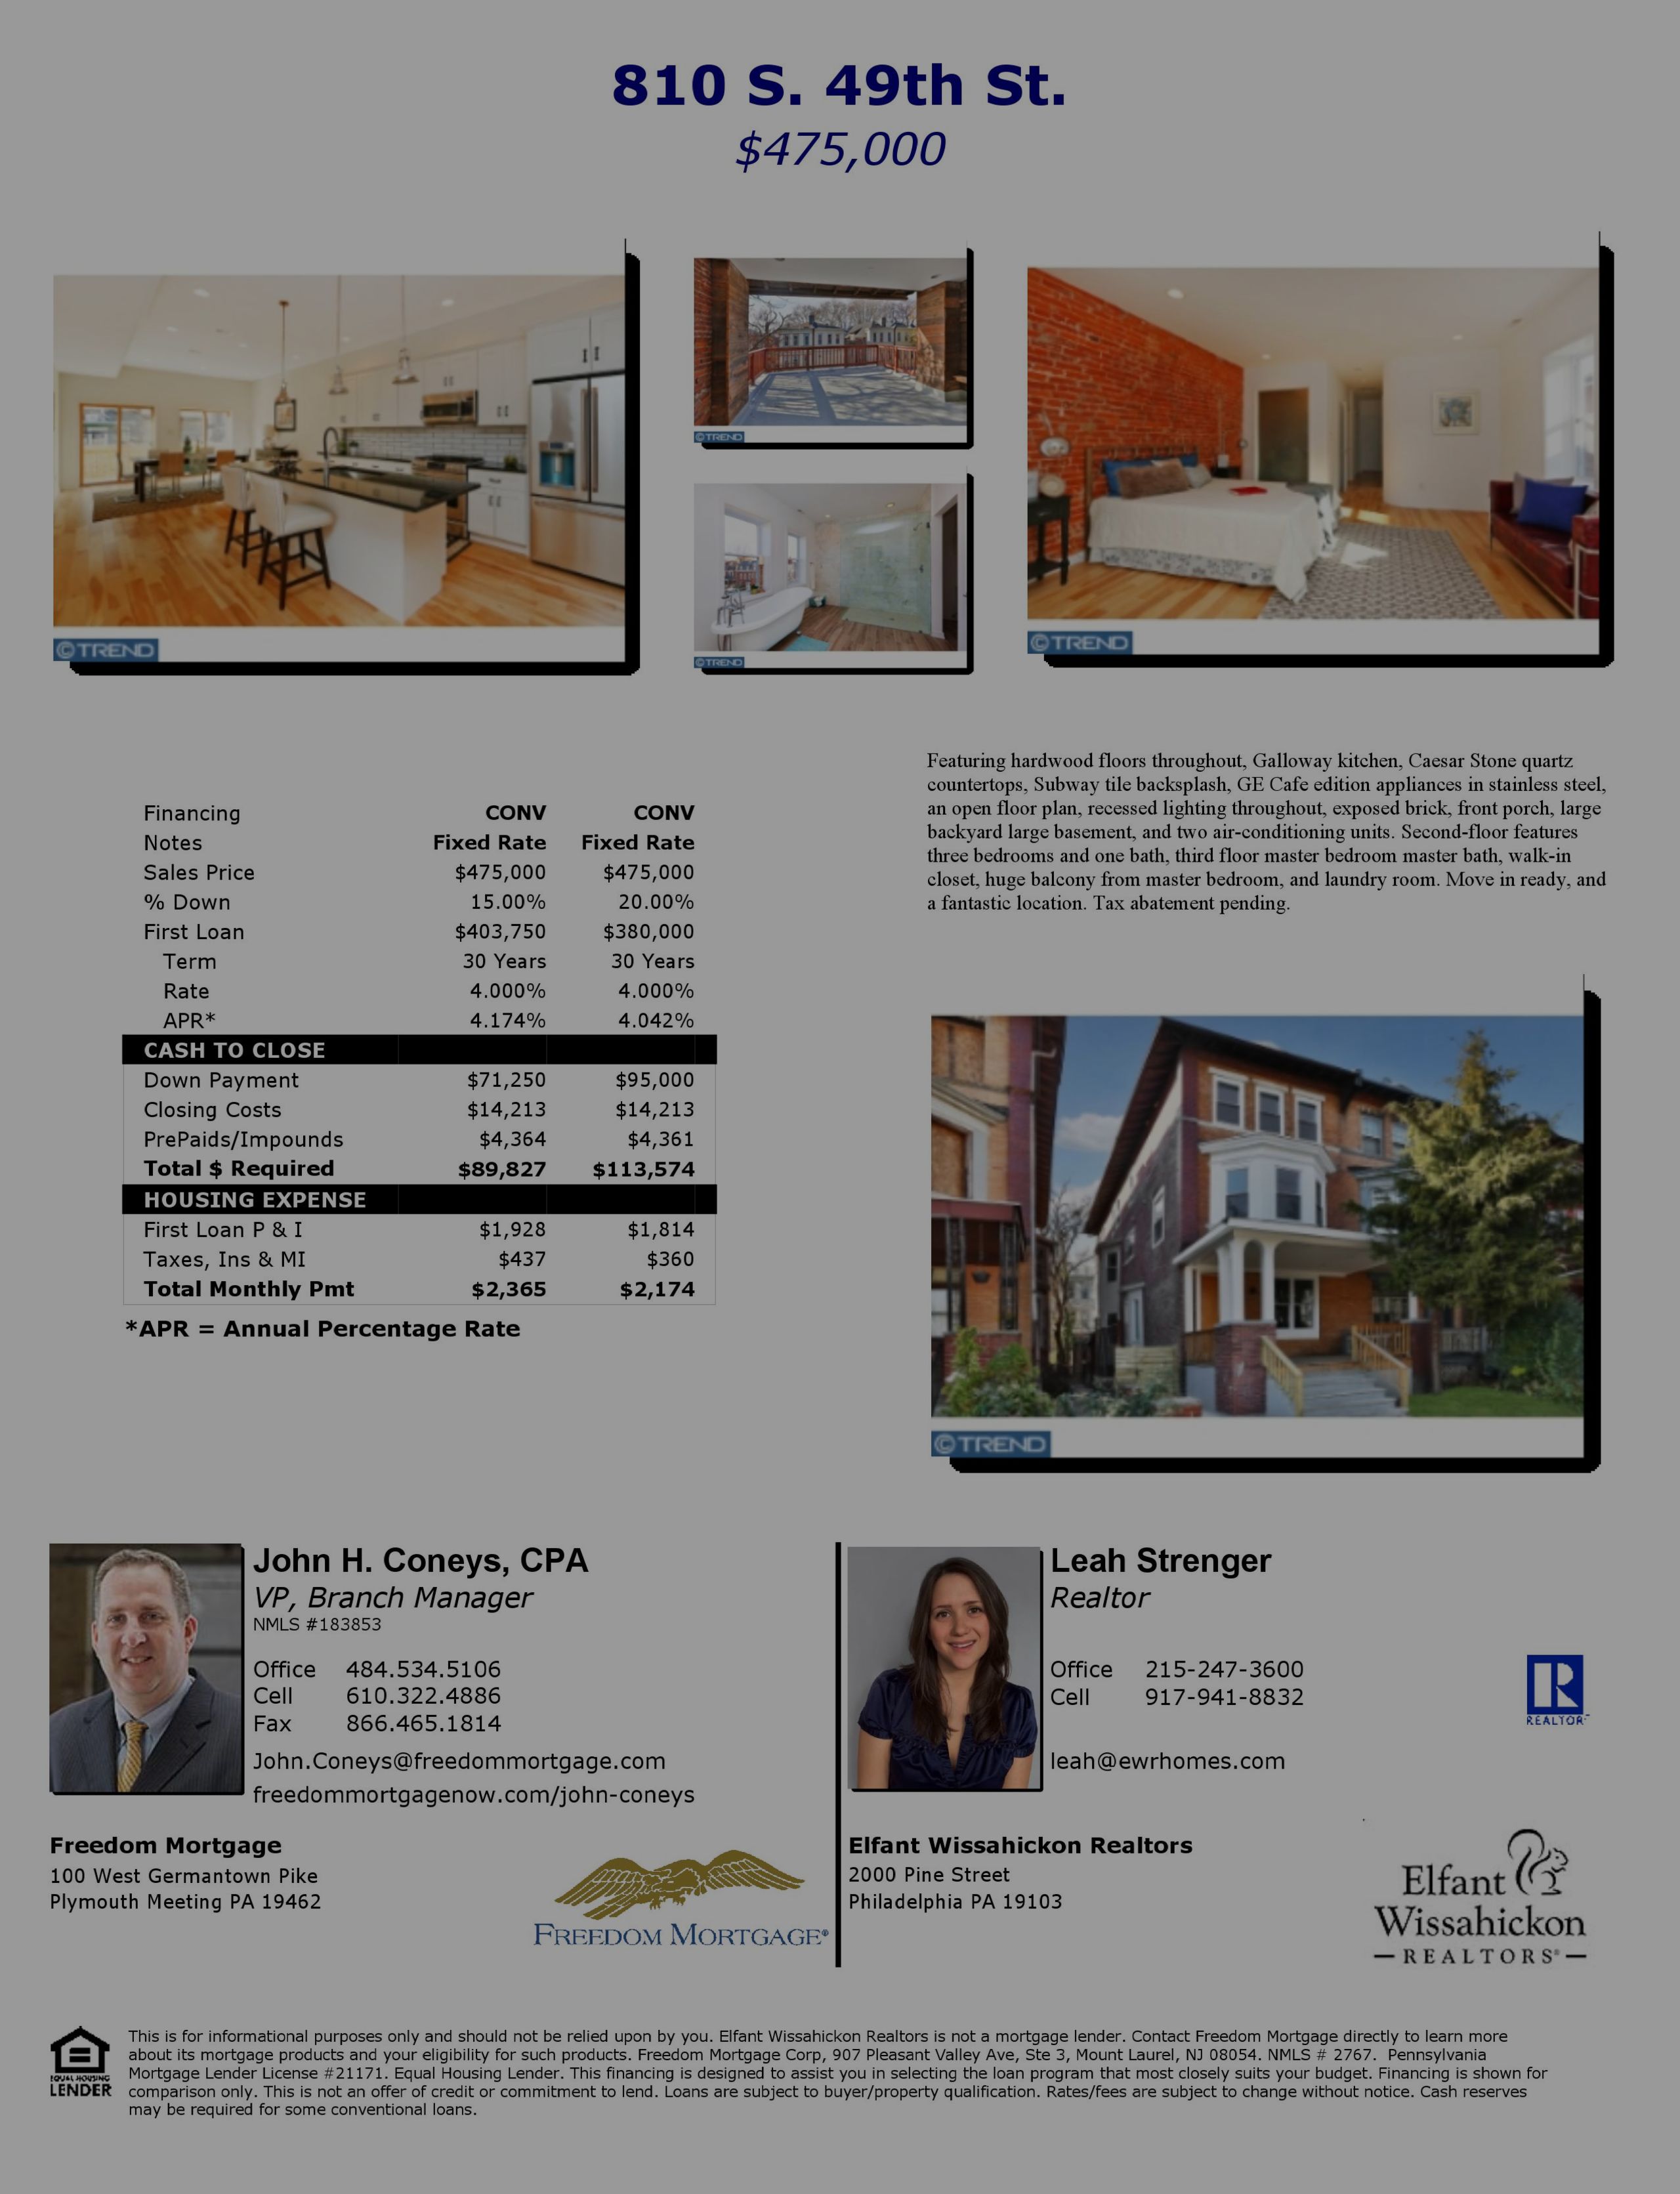 Open House THIS WEEKEND! 12/13/2015 from 12-2 PM